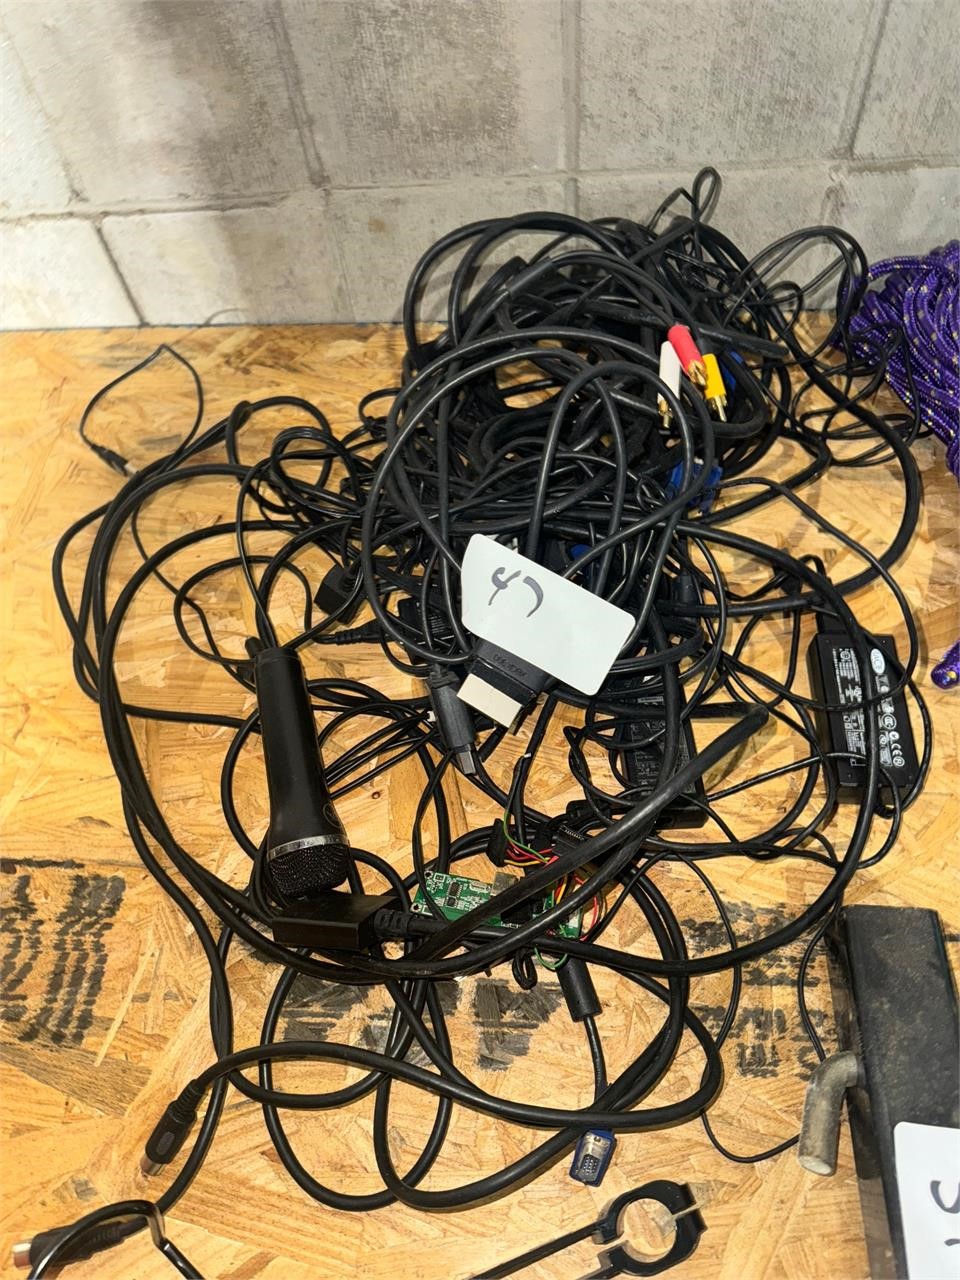 Xbox cables , EA Sports microphones